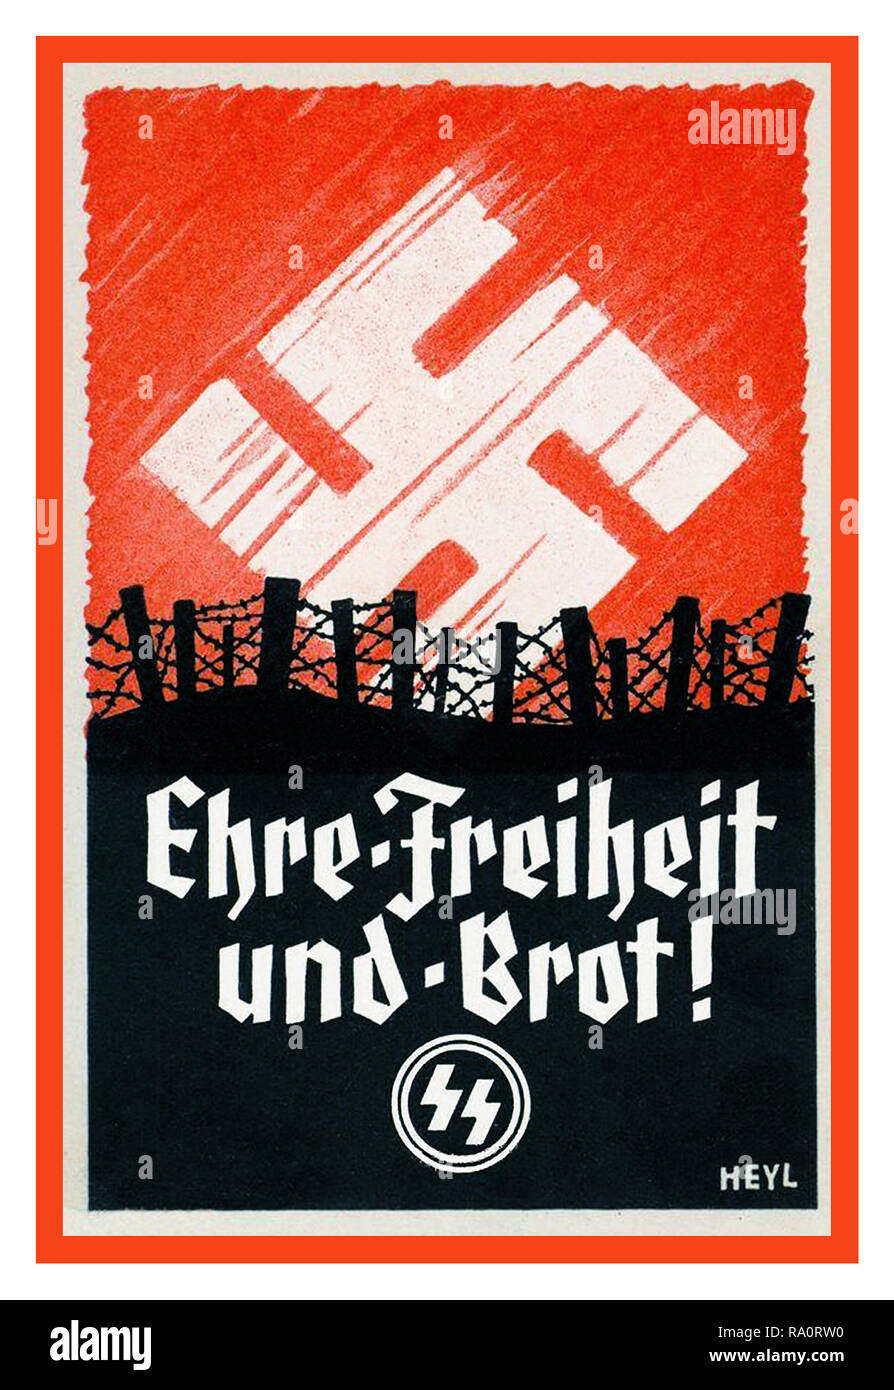 Vintage WW2 Nazi Germany SS Army Propaganda Recruitment Poster for the Waffen SS  'Honour Freedom and Bread'  EHRE, FREIHEIT, und, BROT !  in a battlefield situation with Nazi Swastika as an emblematic sunrise Stock Photo